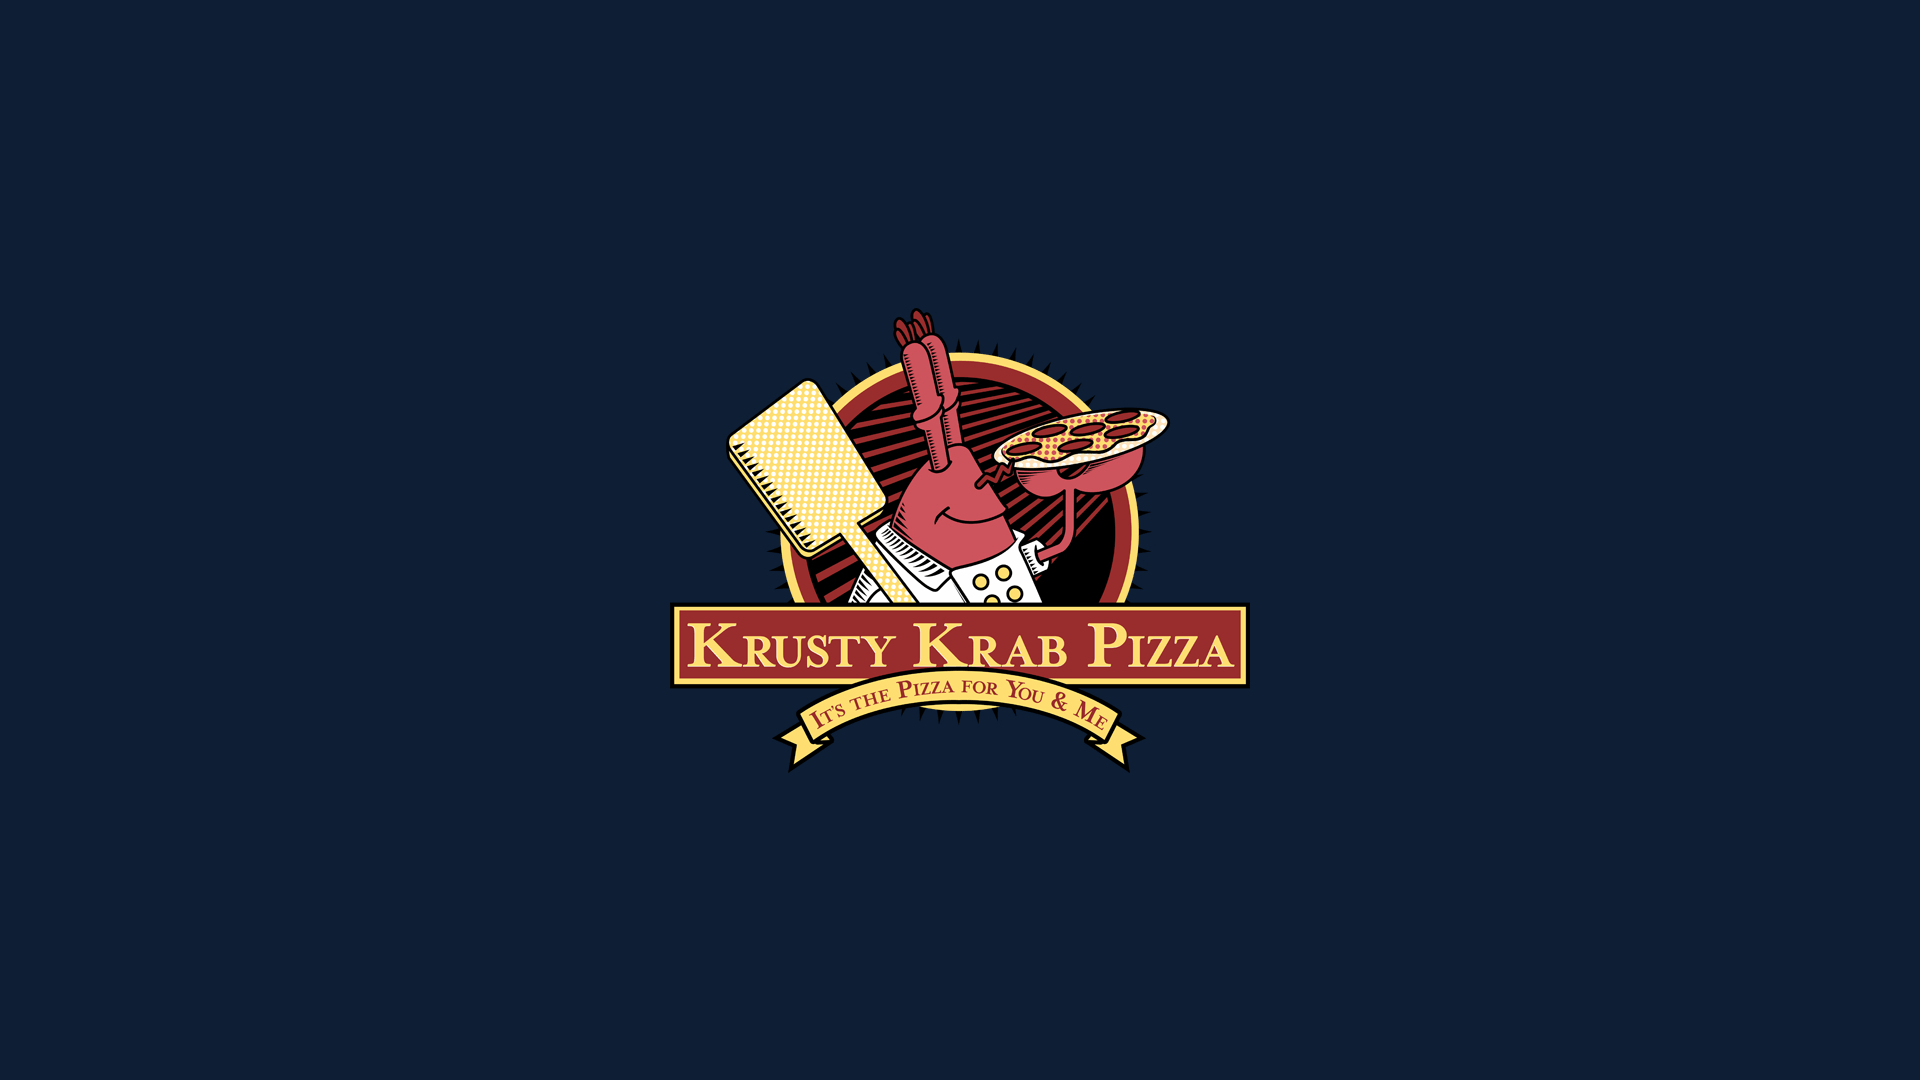 I remade the Krusty Krab Pizza wallpaper and minimized